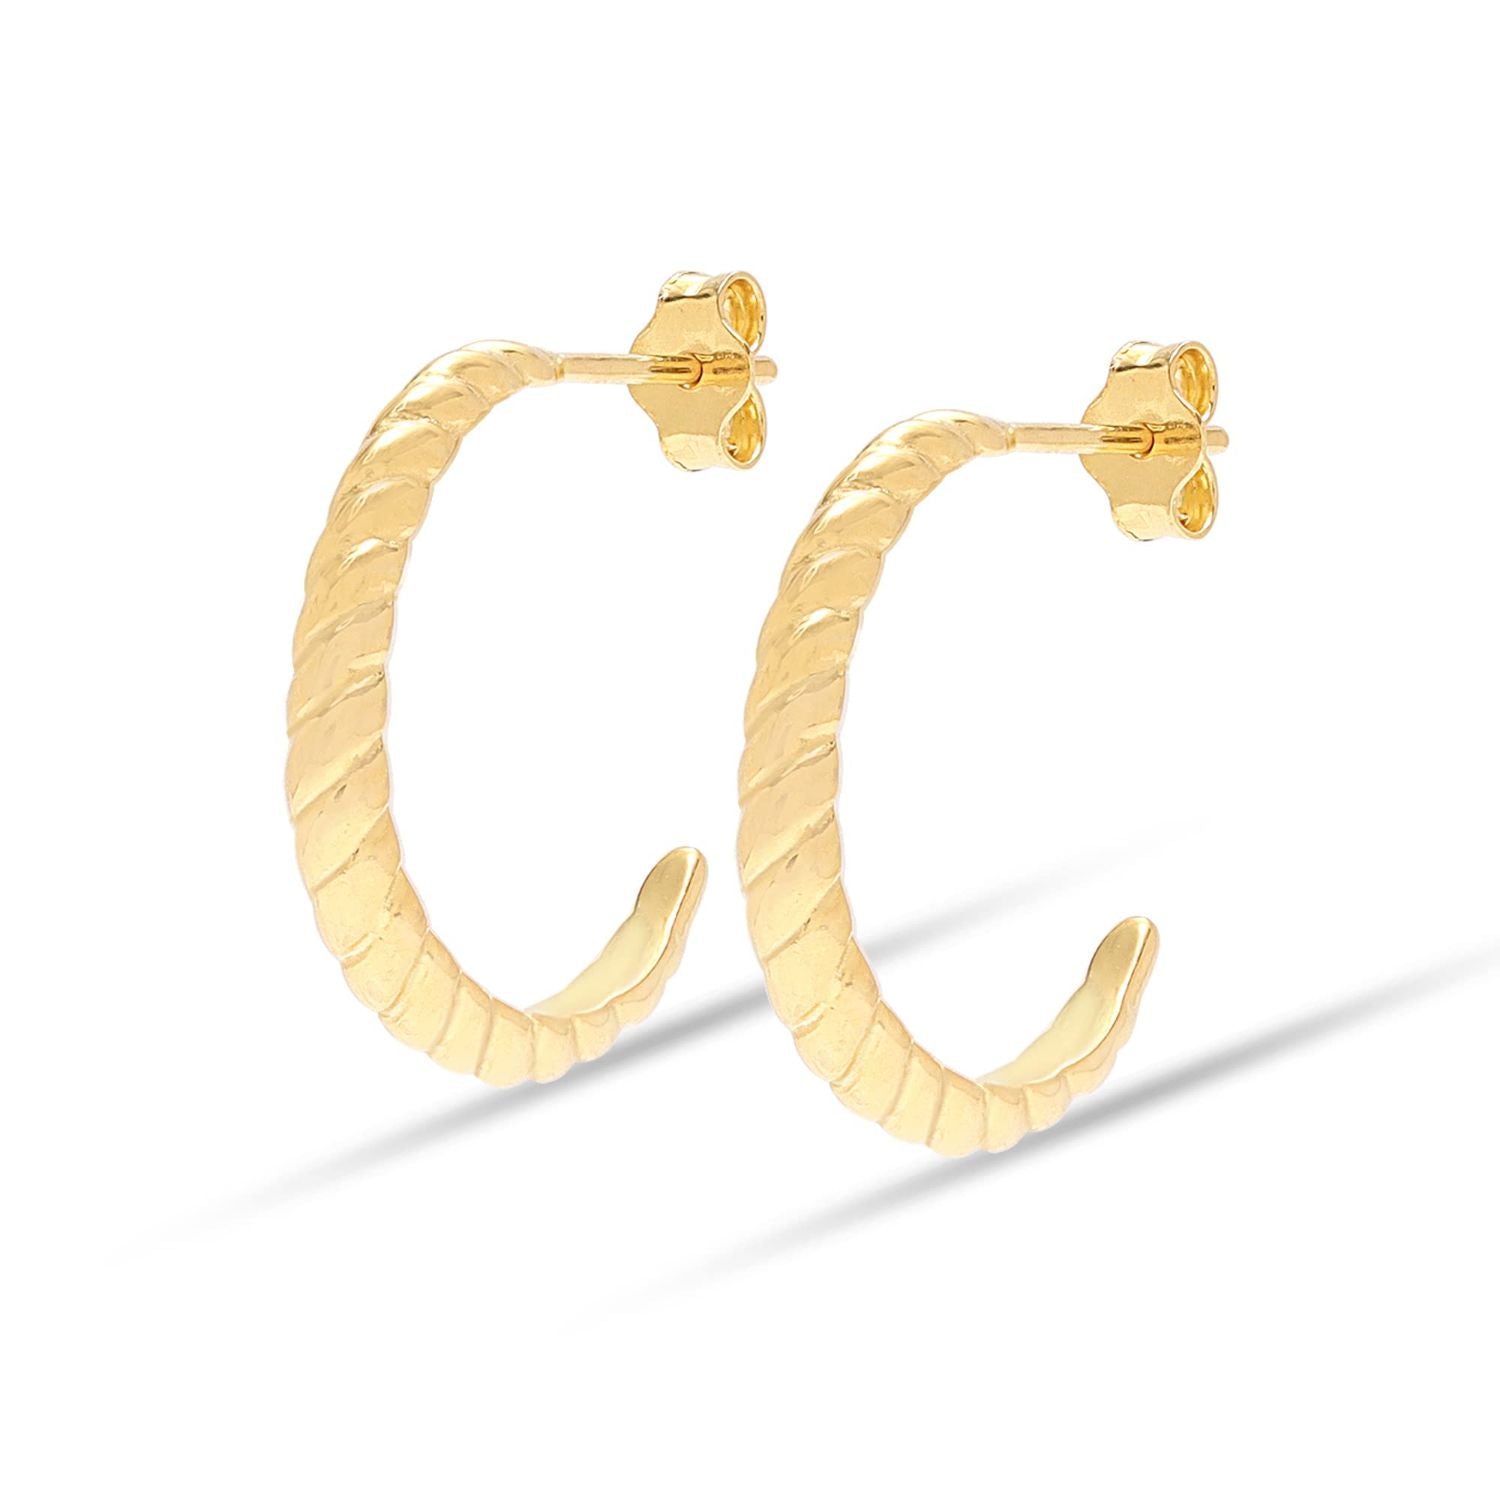 925 Sterling Silver 18K Gold-Plated Thin Croissant Dome C Hoop Earrings for Women Teen